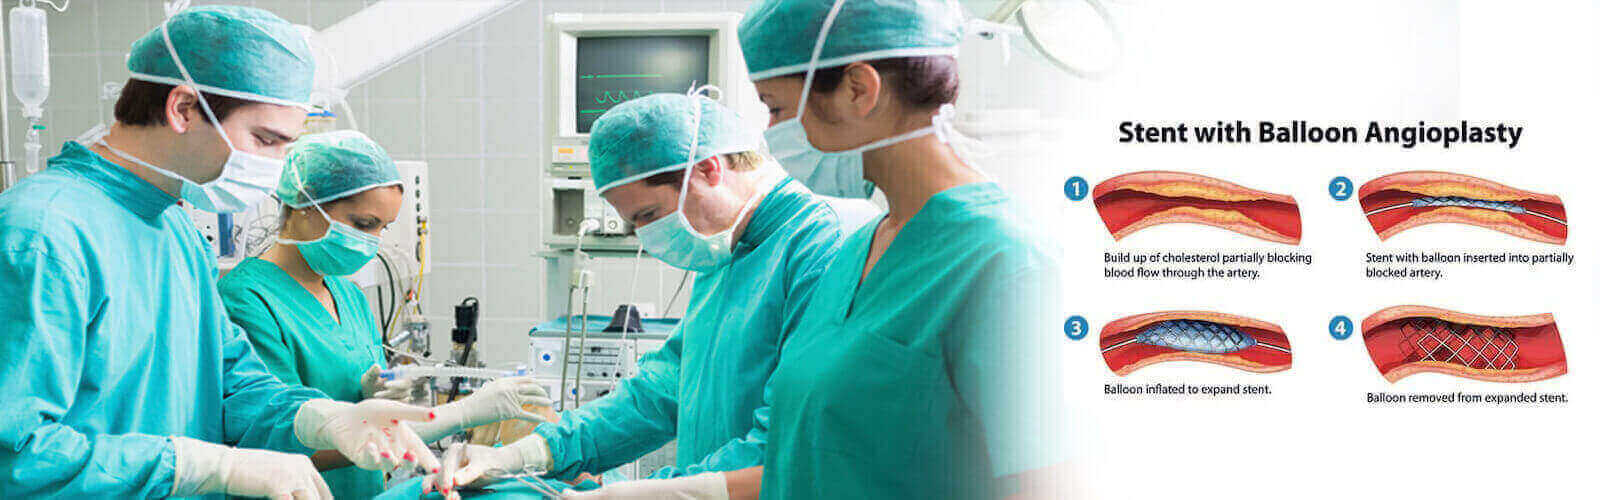 Angioplasty Surgery in Stoke-on-trent